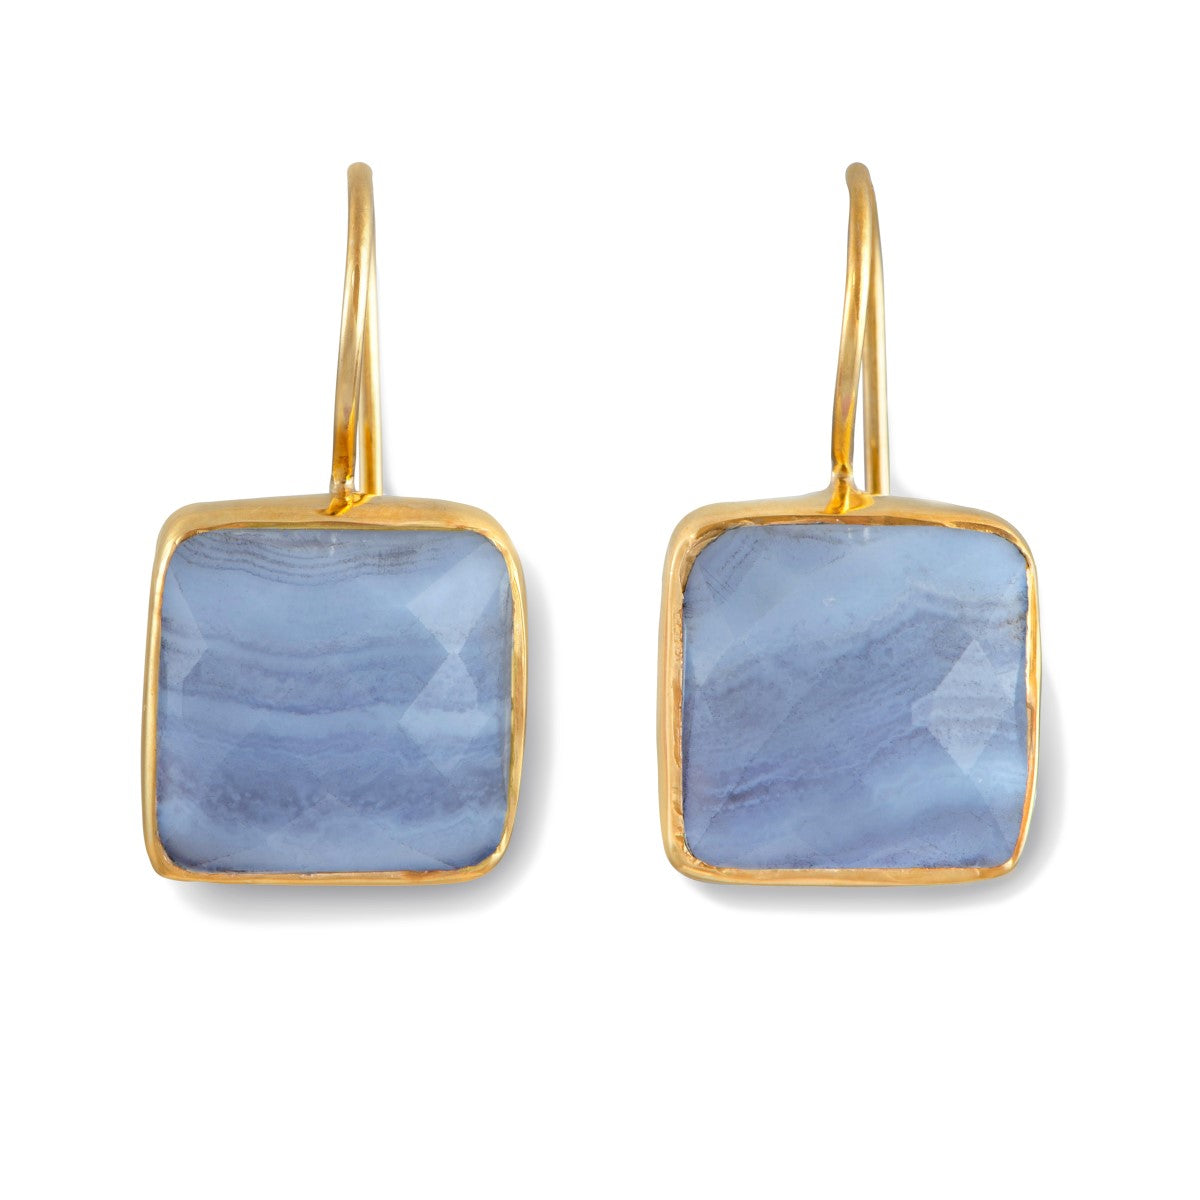 Gold Plated Sterling Silver Square Gemstone Earrings - Blue Laced Agate